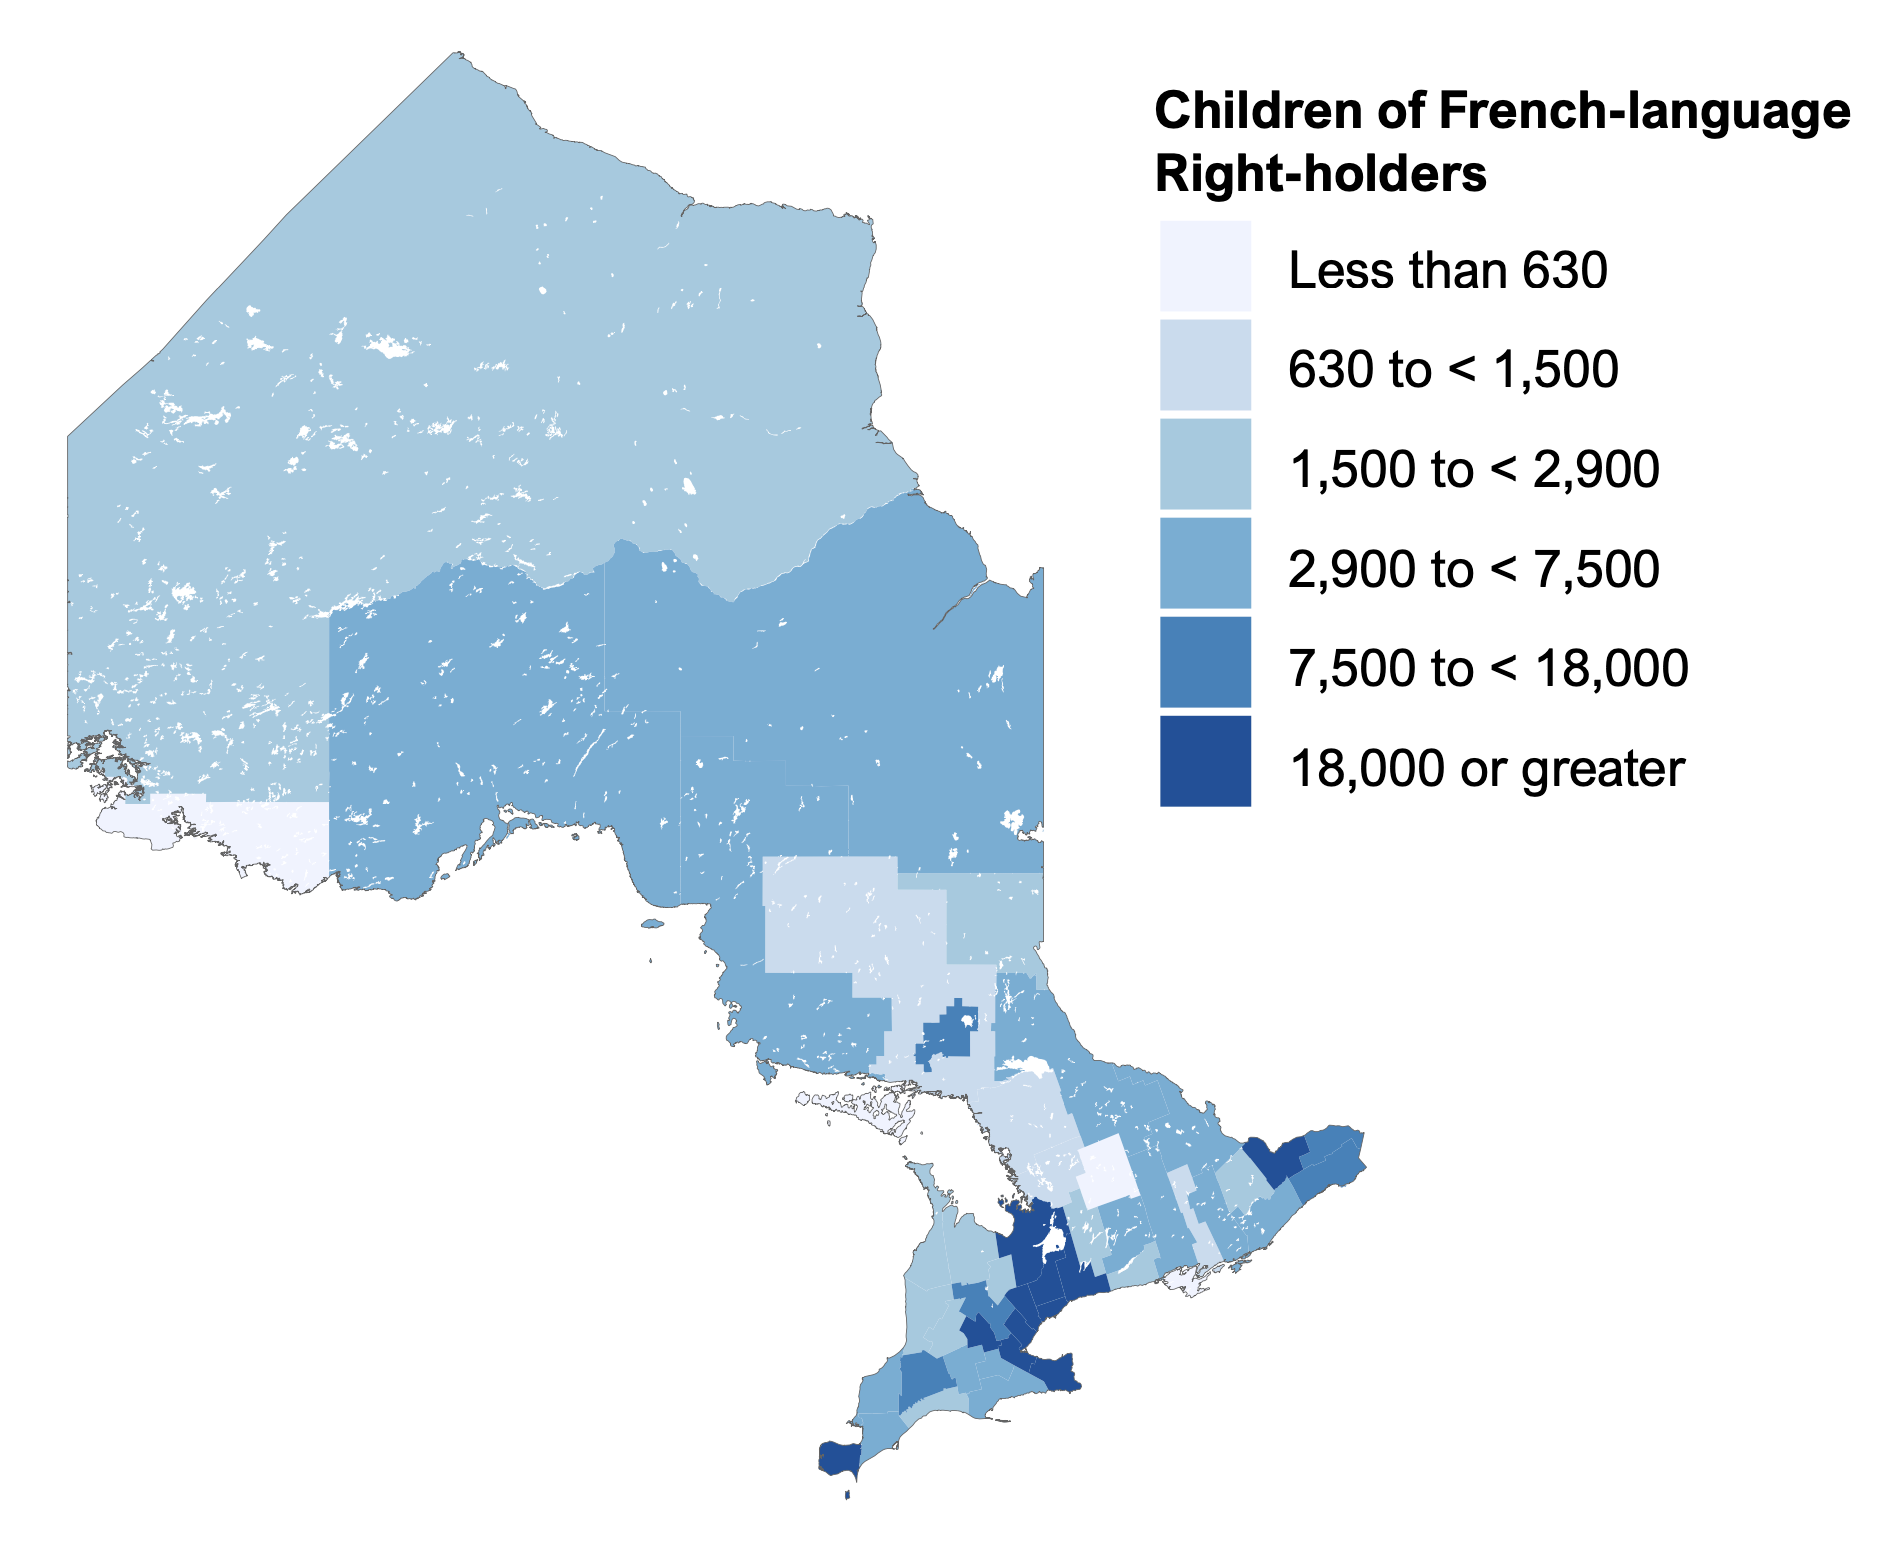 Figure 3.3 shows the number of children and youth whose parents are French-language rights-holders in each of Ontario’s 49 census divisions. The areas with the largest concentration of student-aged children and youth whose parents are French-language rights-holders are: Ottawa (55,250), Toronto (34,720), Peel (19,675), York (15,495), Essex (11,555), Prescott and Russell (10,925), and Greater Sudbury (10,775).